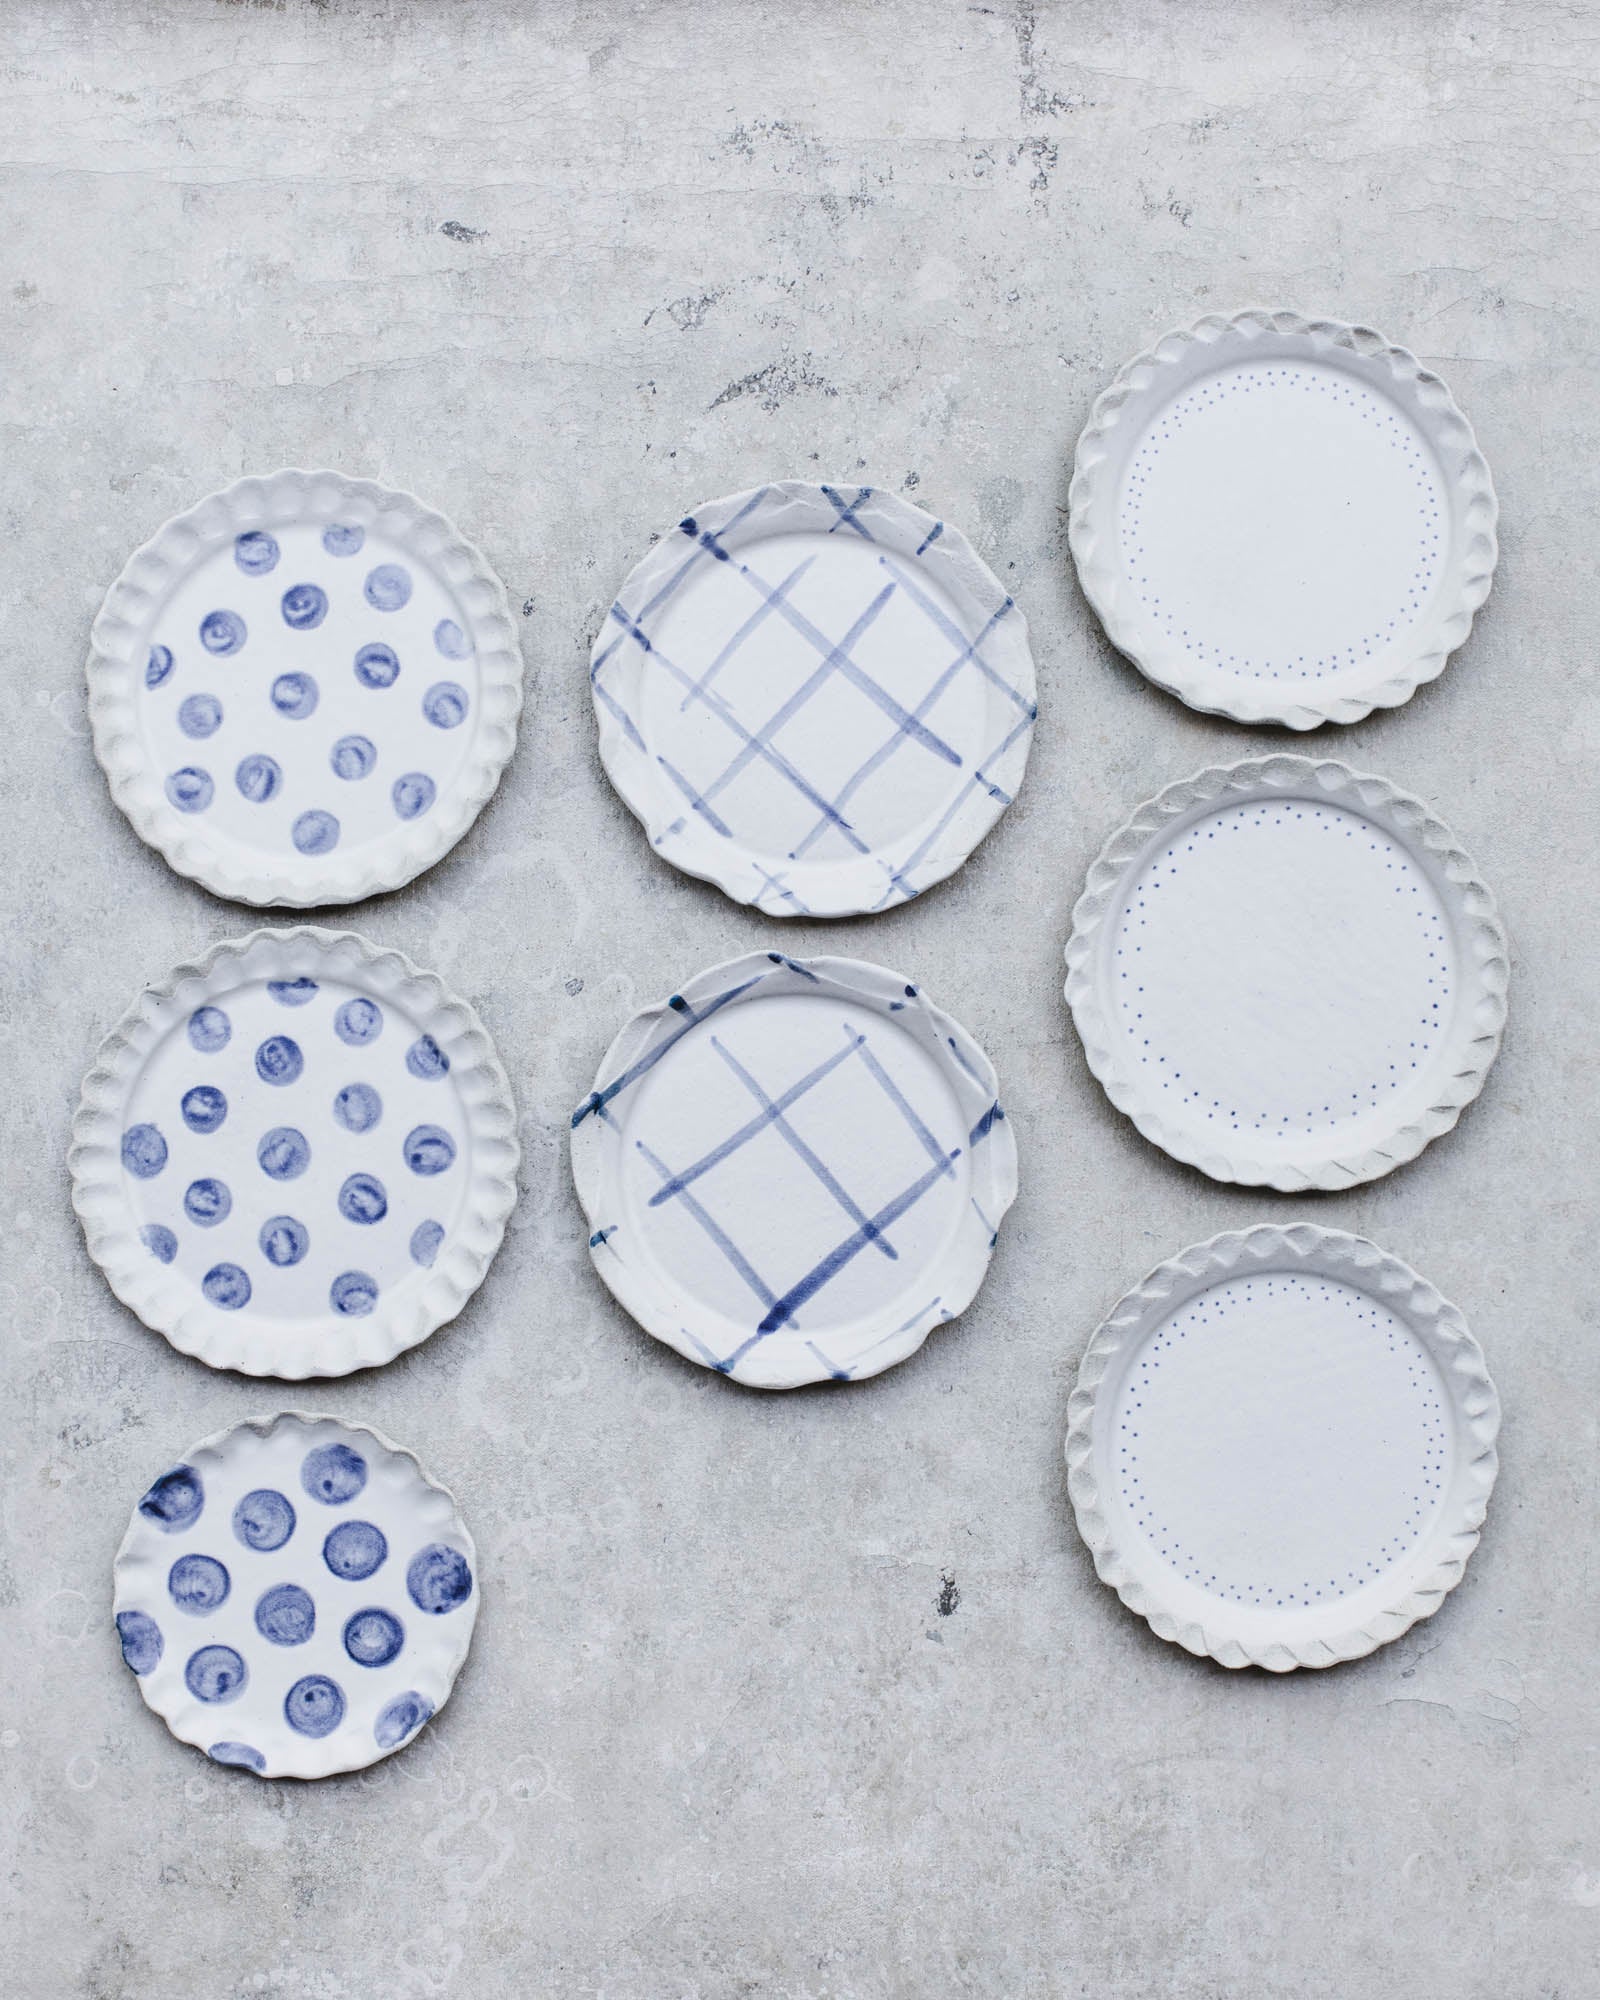 Handmade ceramic cake plates with decorative rims in blue and white patterns by clay beehive ceramics